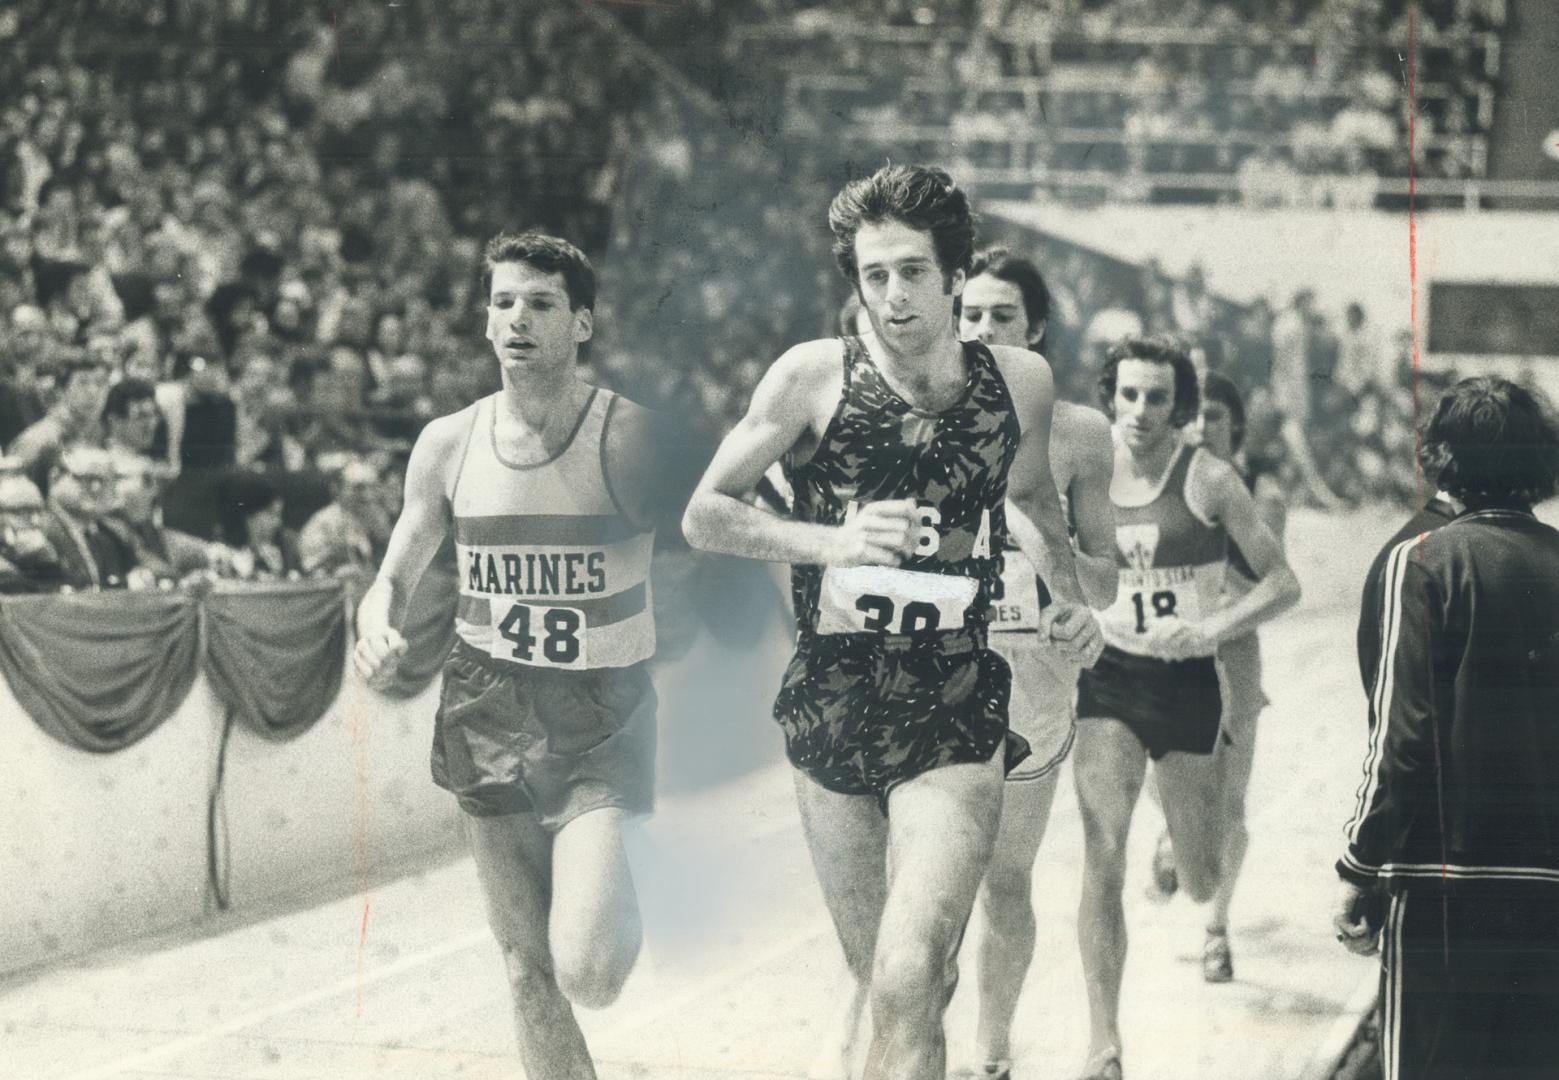 Marty Liquori who missed Olympics through injury, is making a comeback